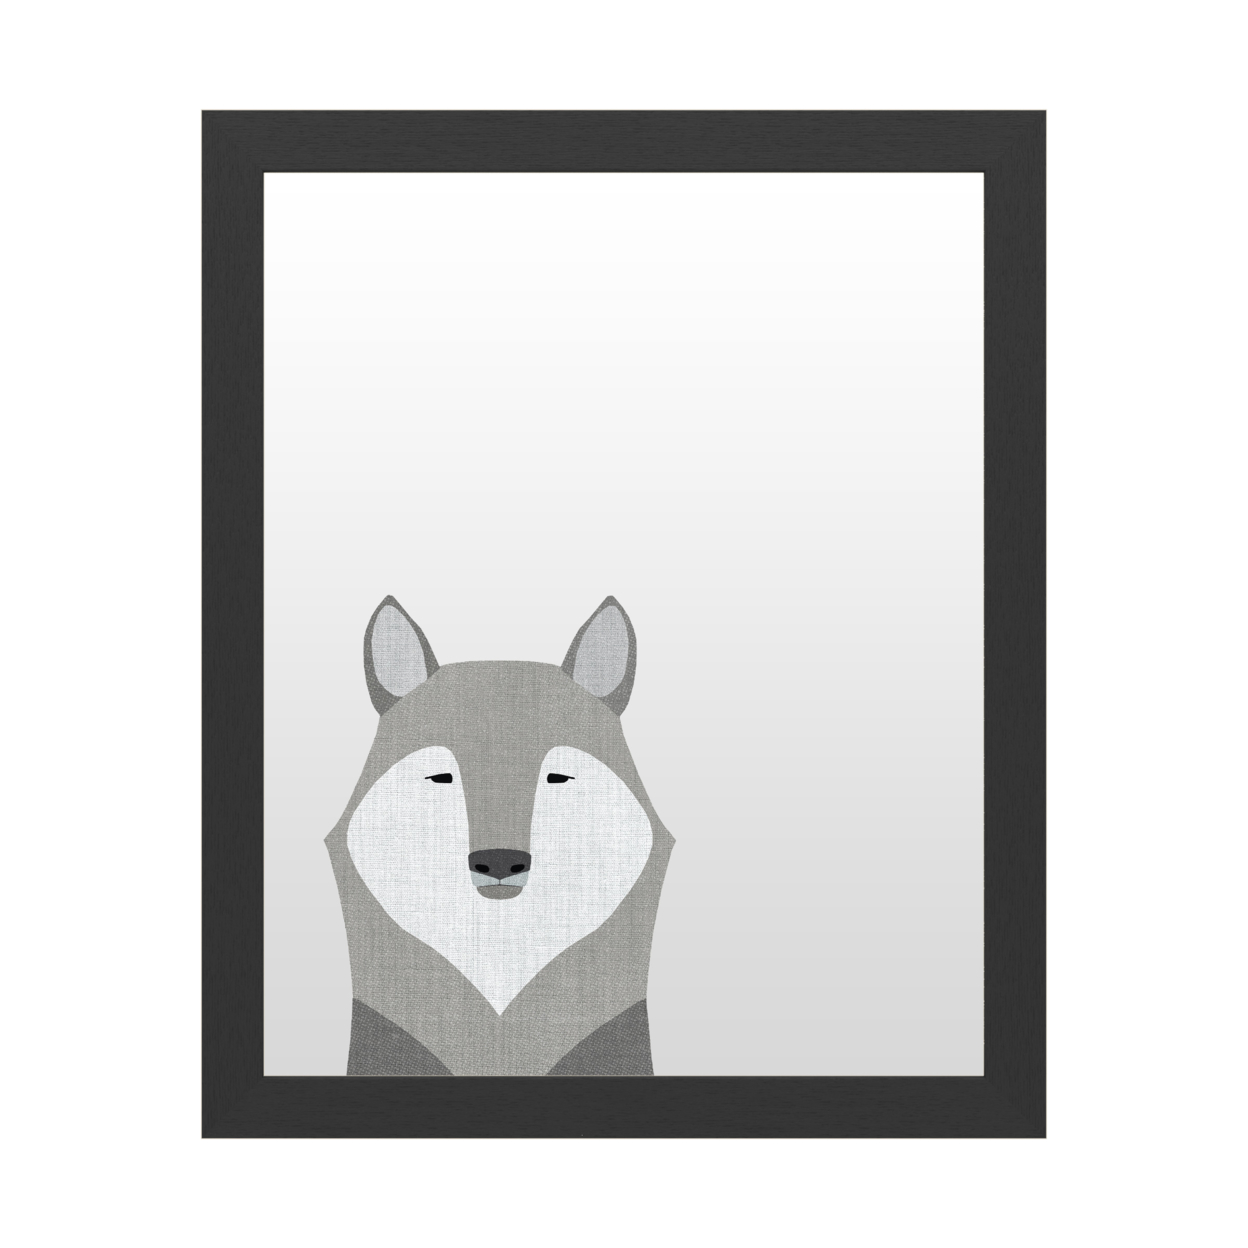 Dry Erase 16 X 20 Marker Board With Printed Artwork - Annie Bailey Art Gray Wolf White Board - Ready To Hang